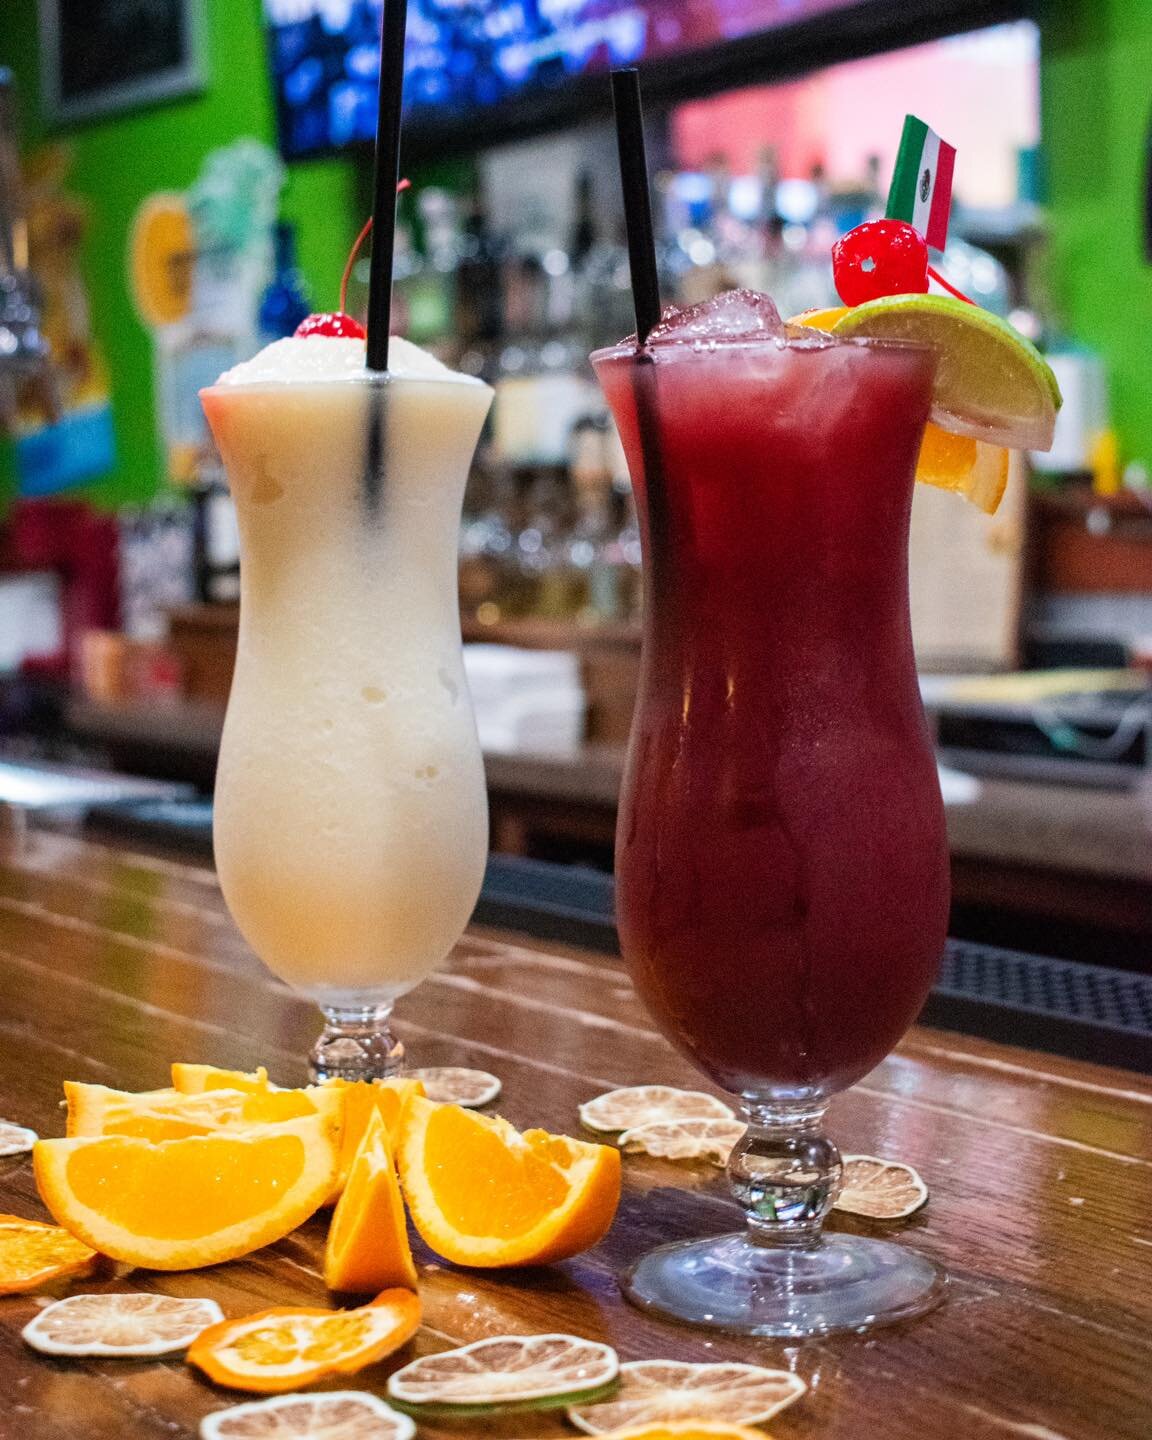 Announcement: Avocados Mexican Restaurant will close tomorrow for Easter 🐣 We will be back open Monday, regular hours! 
.
.
Whether its a Sangria or a Pi&ntilde;a Colada, our signature cocktails are a great way to relax 😎 
.
. 

#bostonfoodies #sou